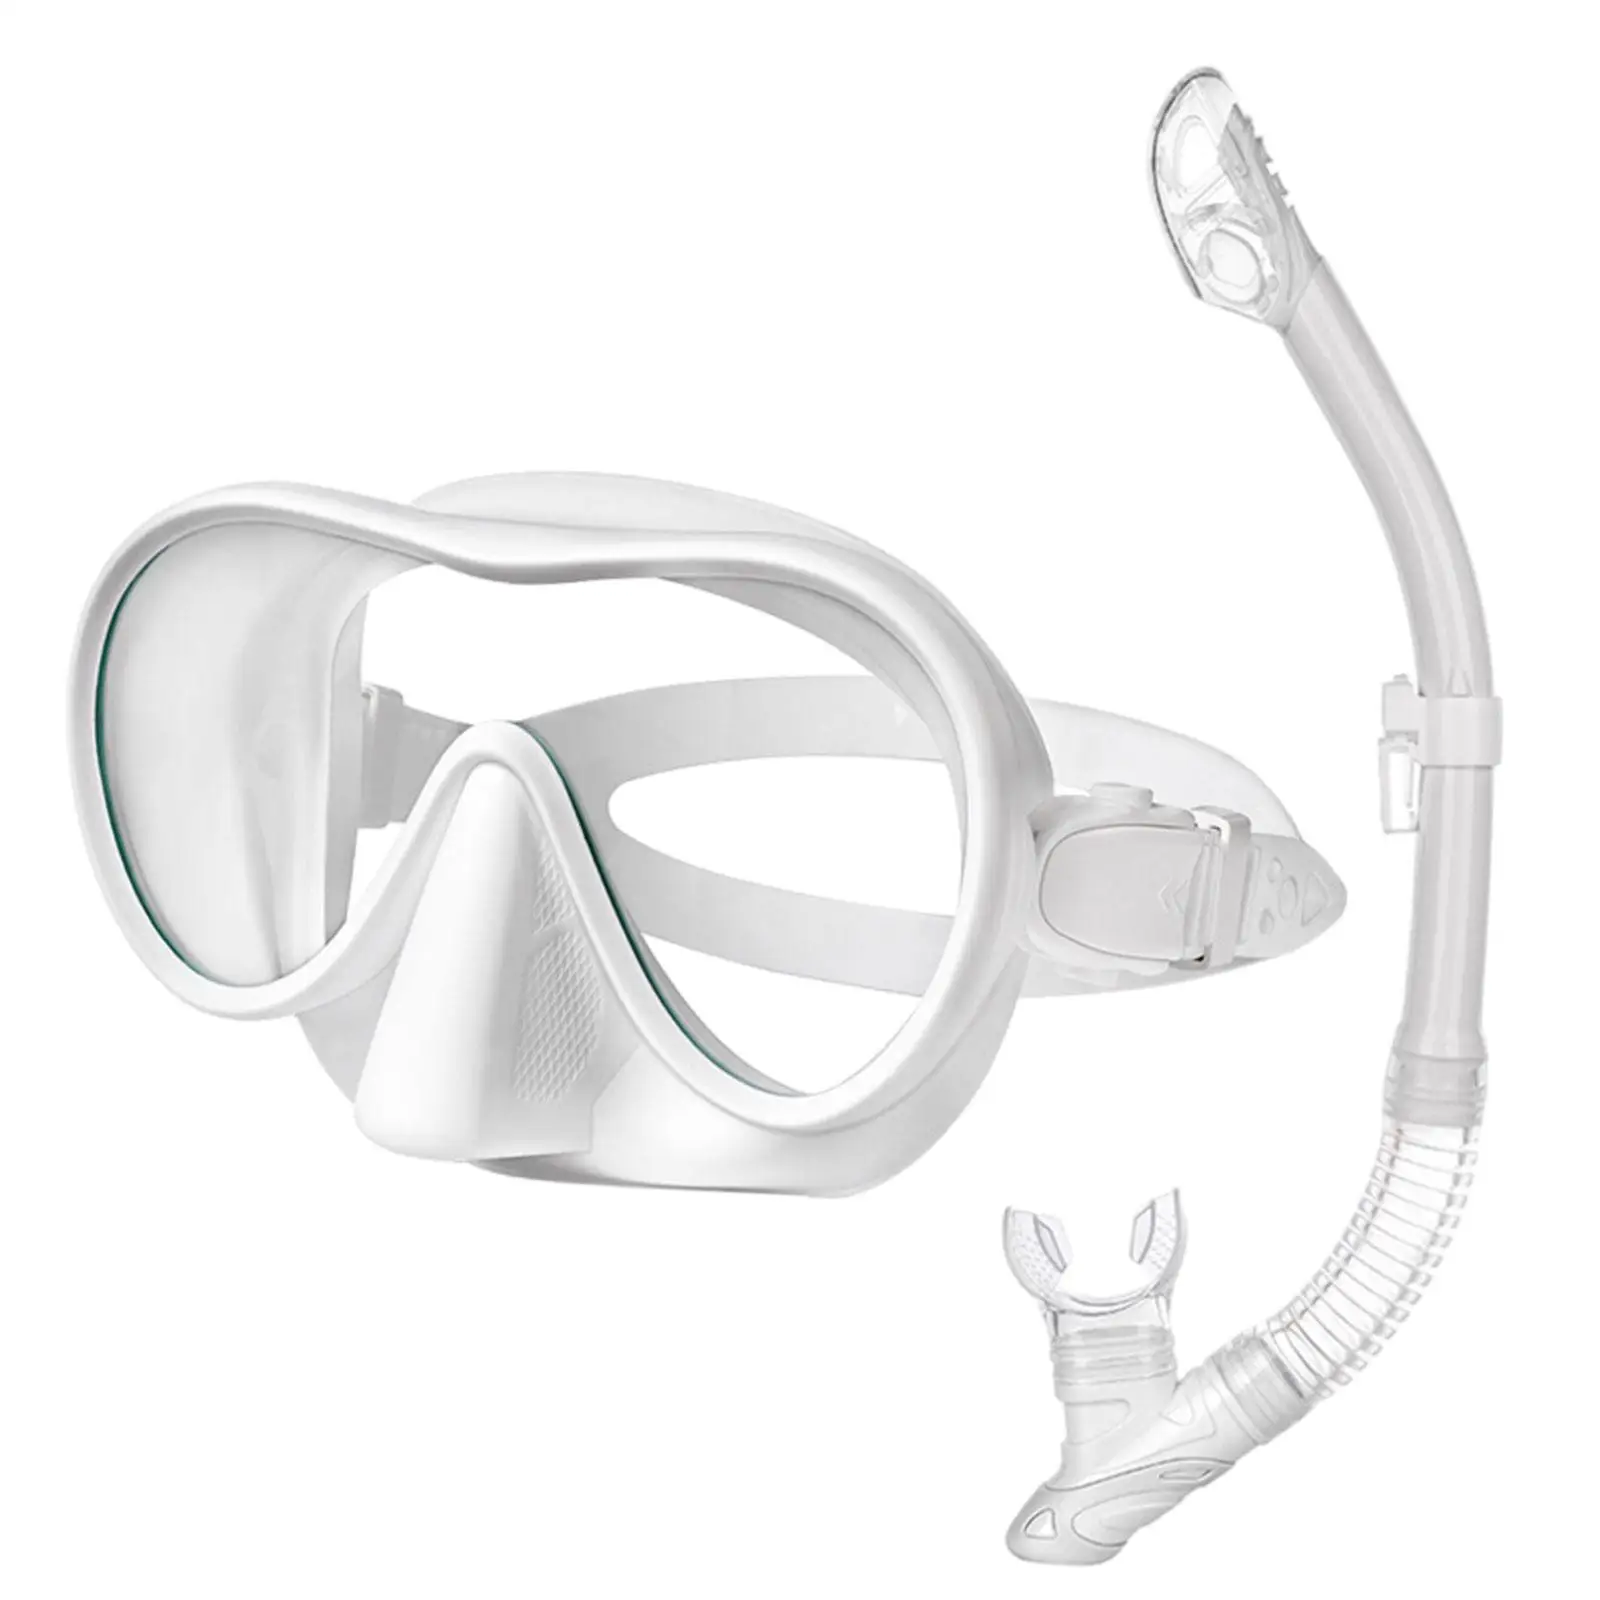 Snorkel Set Snorkel Swim Goggles Wide View Diving Mask Leakproof Swimming Goggles Swim Mask for Snorkeling Swimming Scuba Diving